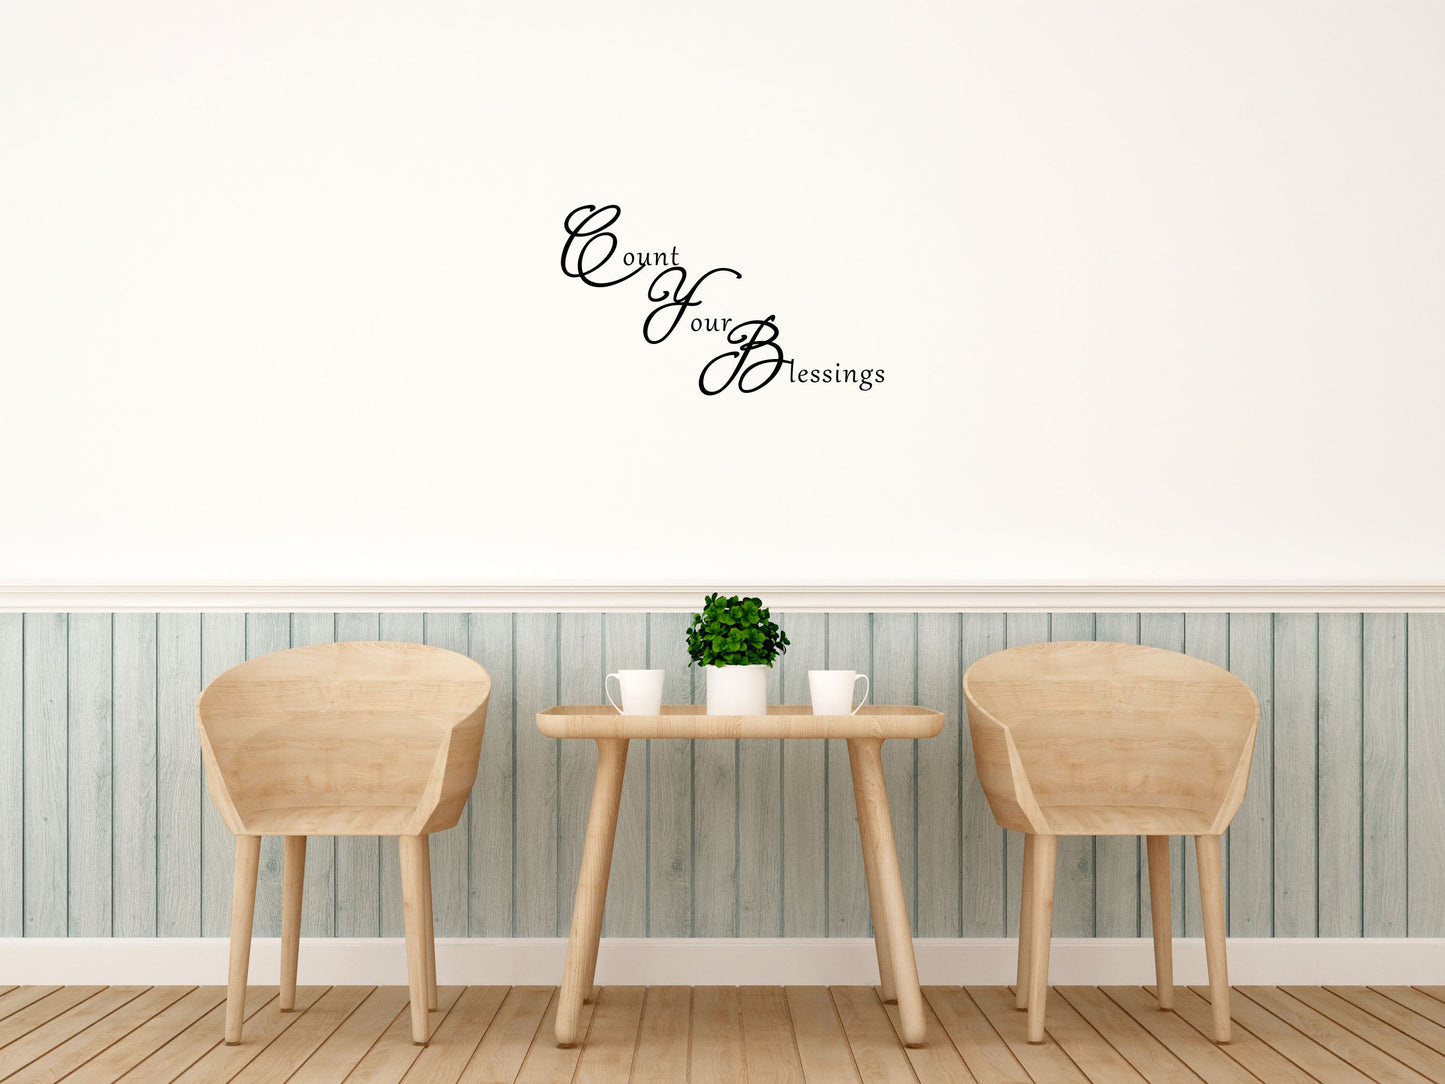 Count Your Blessings Wall Decal Vinyl Wall Decal Inspirational Wall Signs 